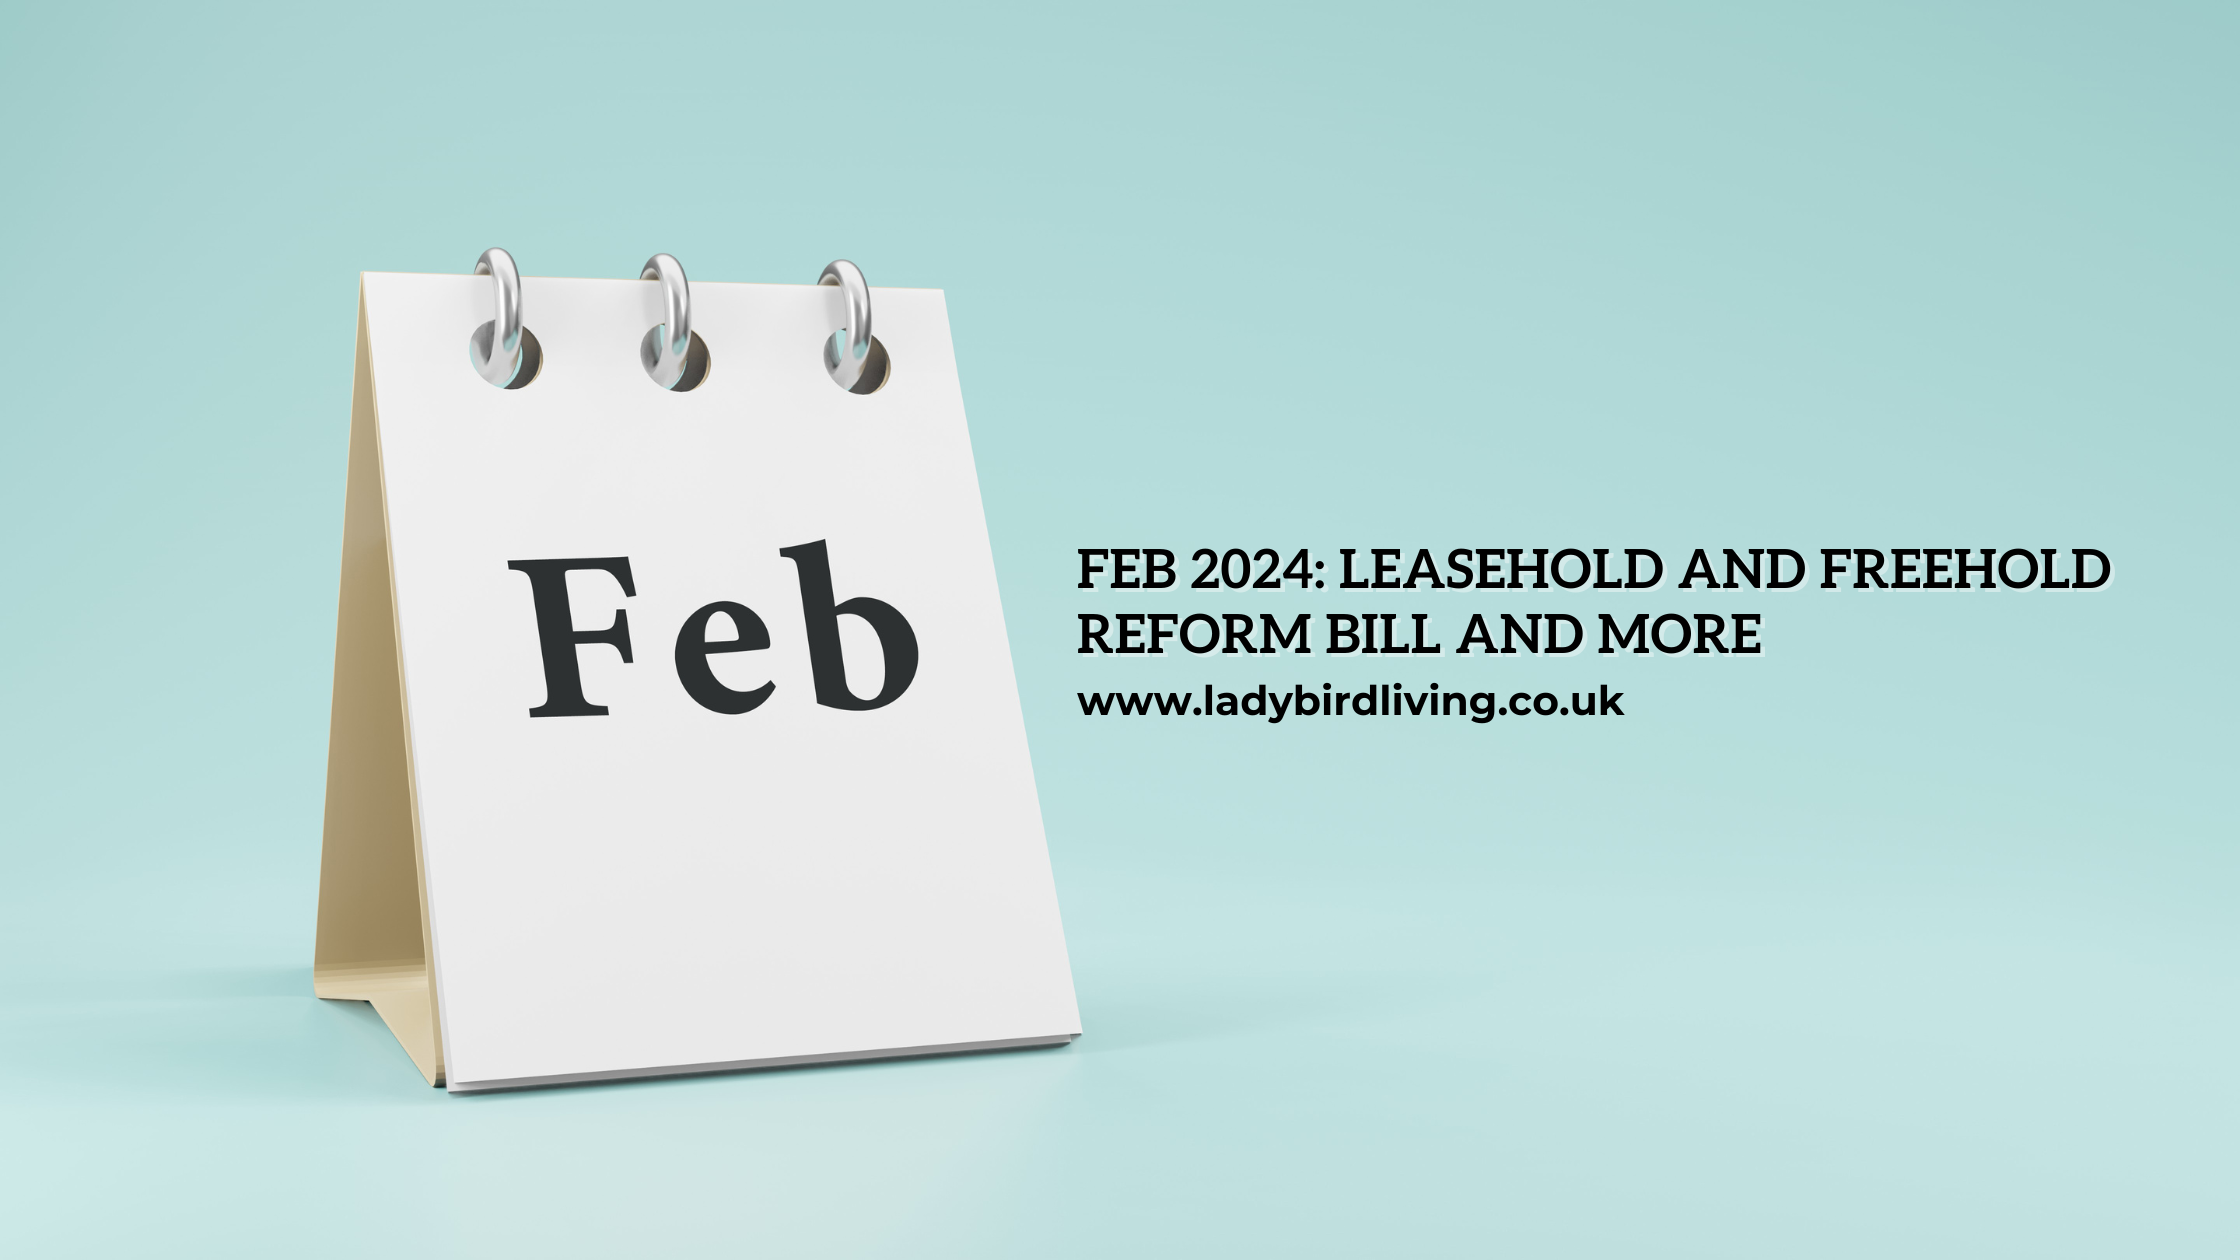 Feb 2024: Leasehold and Freehold Reform Bill and more